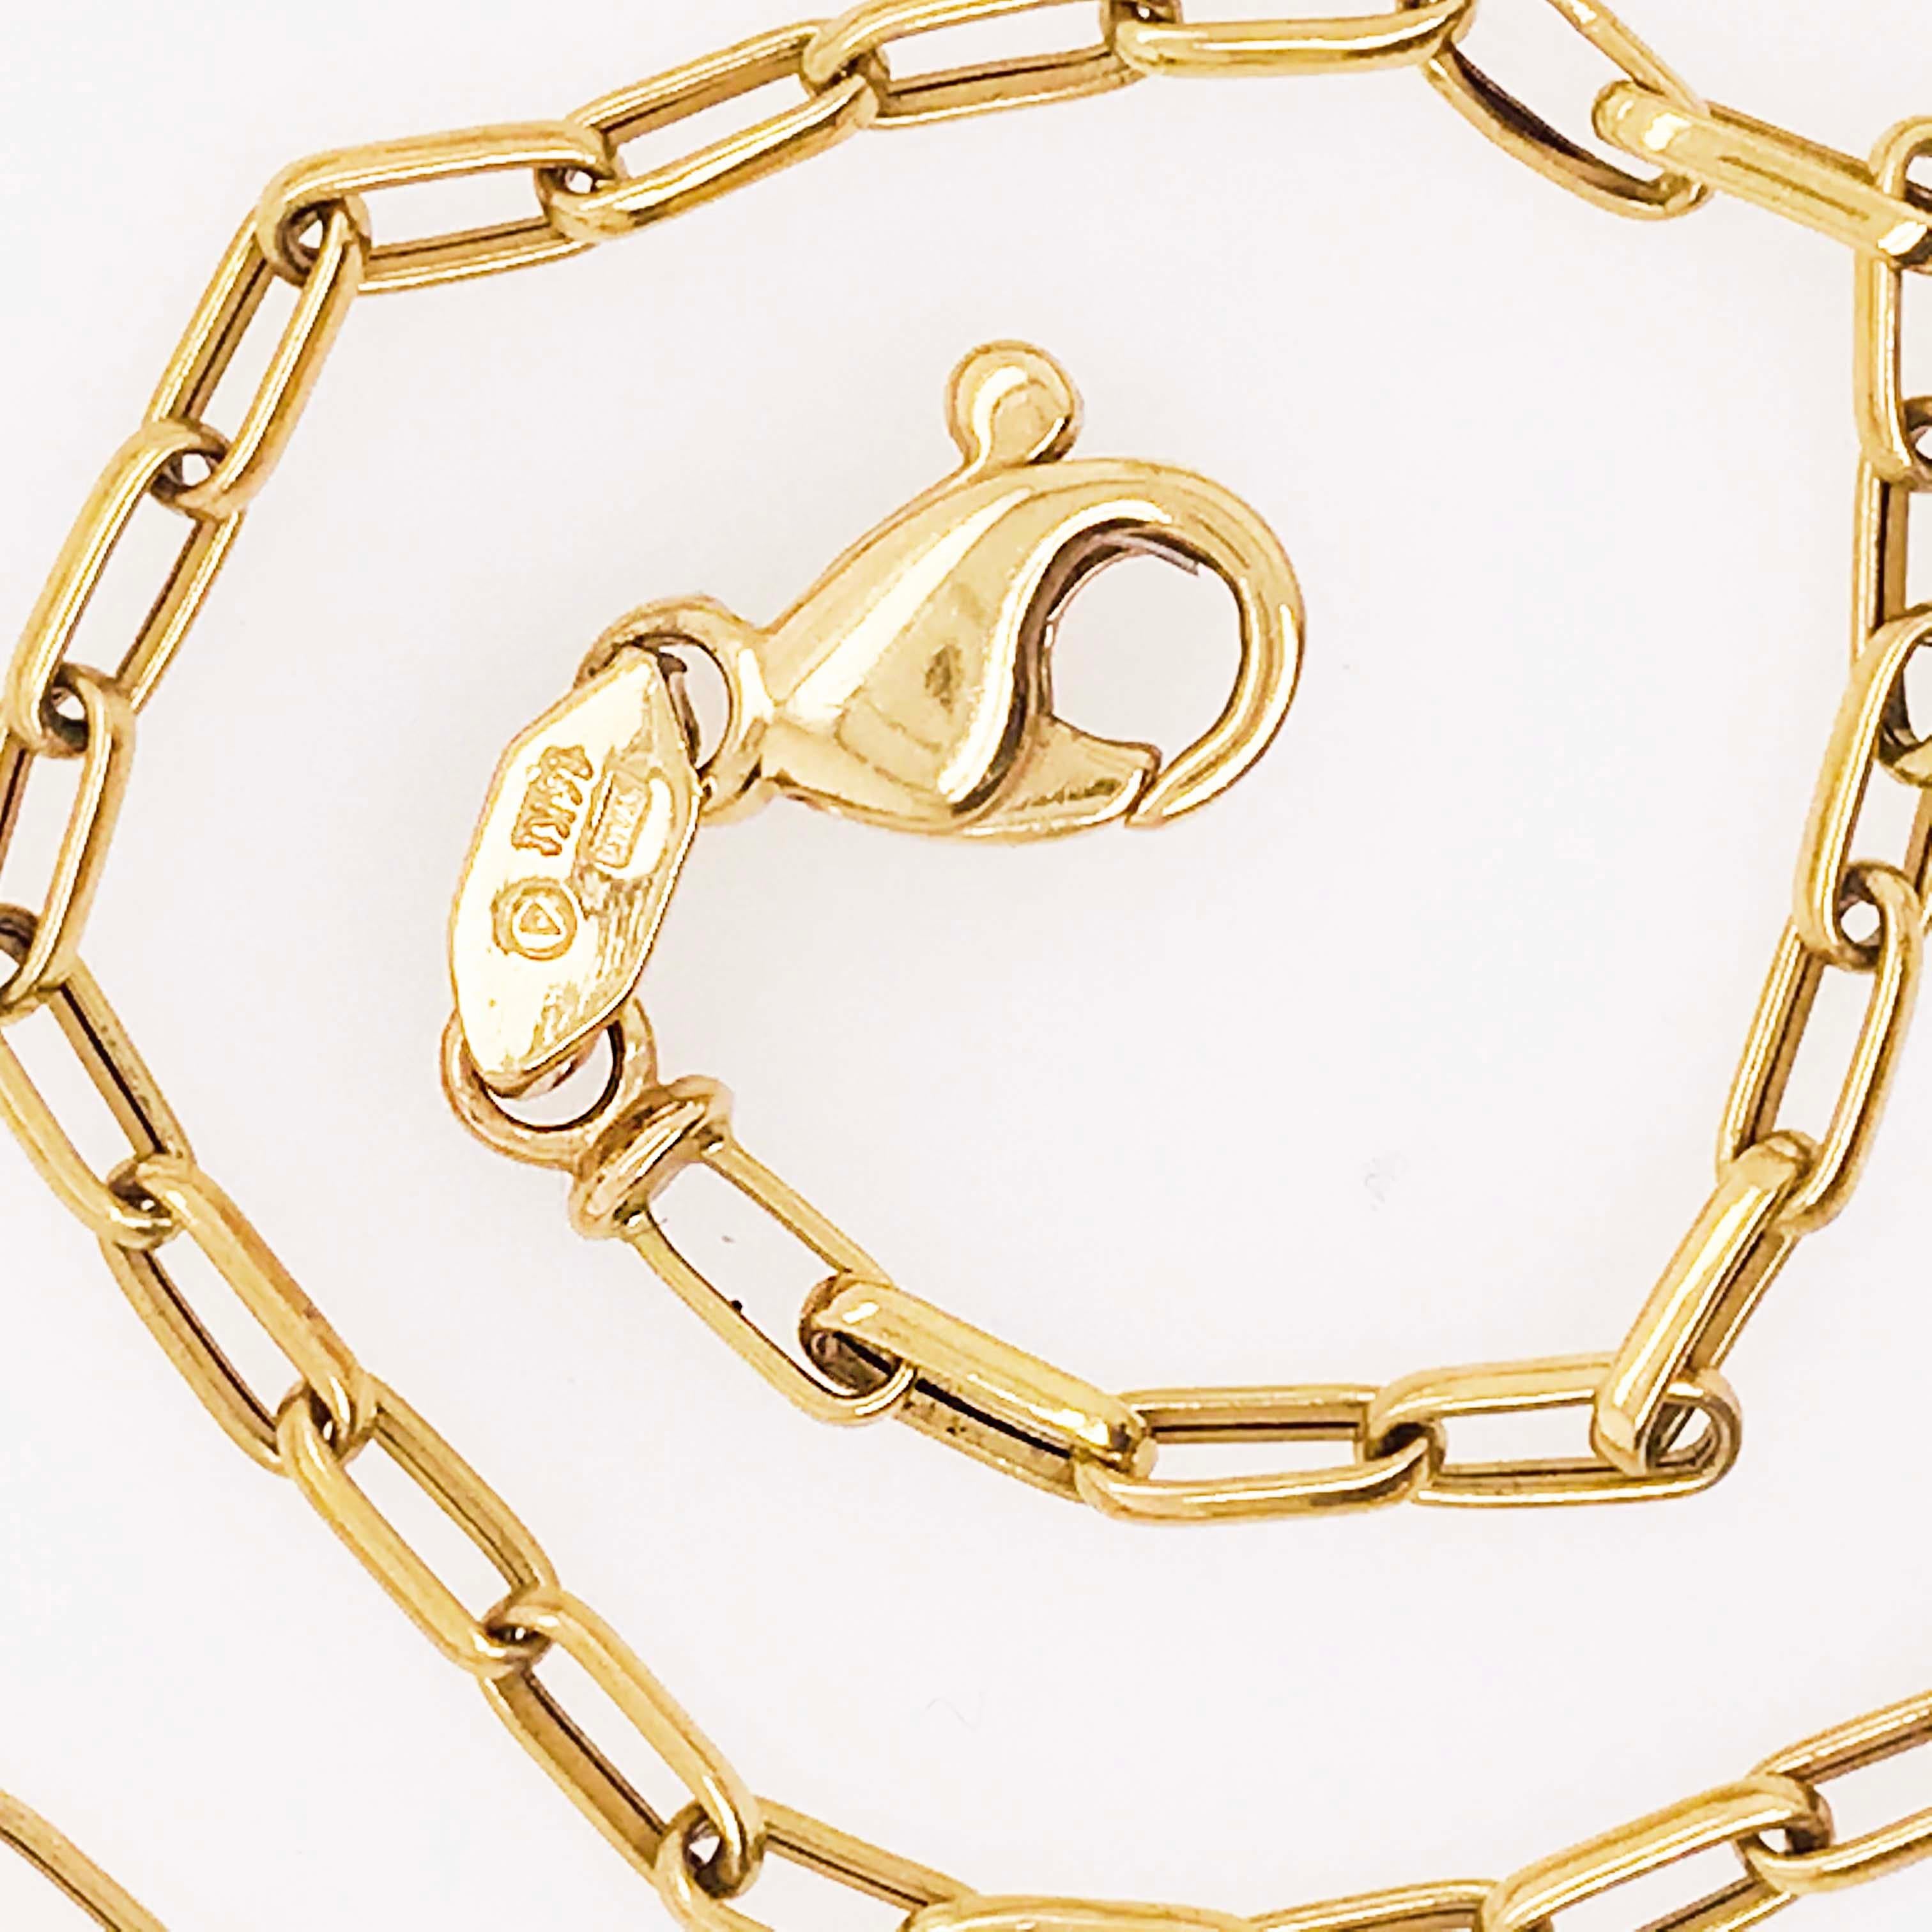 This paperclip gold chain necklace is a staple in fashion jewelry! Chain necklaces are back in style an stronger than ever! This paperclip link necklace has been hand crafted in Italy. Italy is home to the finest chain craftsmen. Each link has been